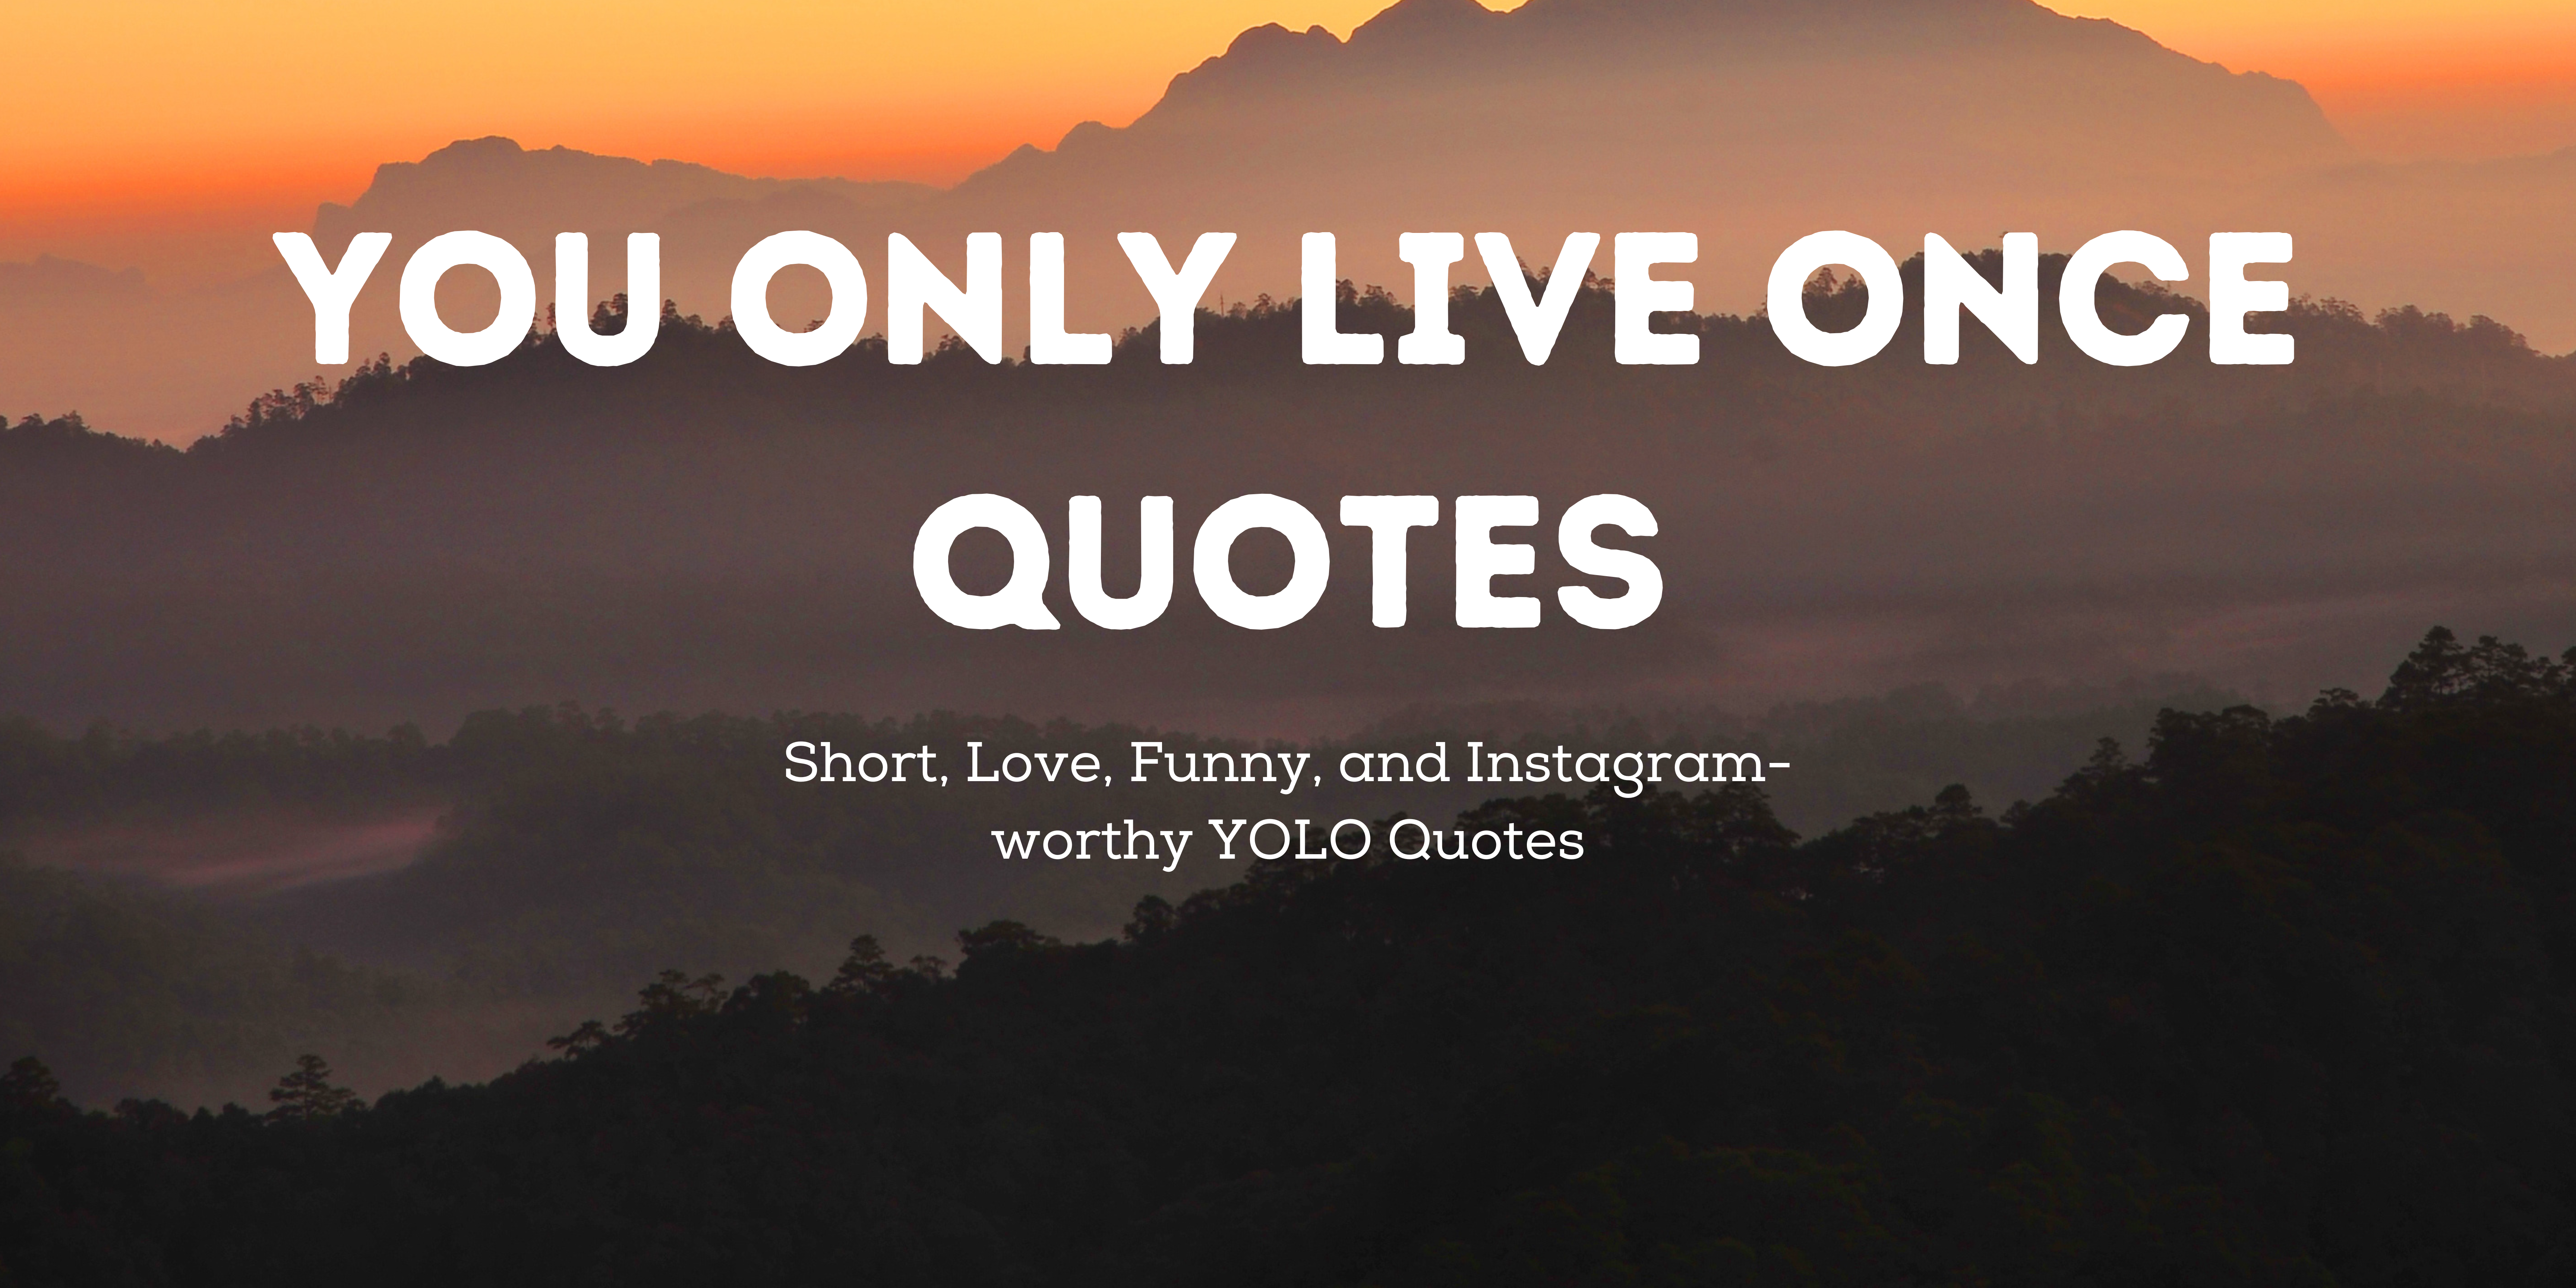 You Only Live Once Quotes: Short, Love, Funny, and Instagram-worthy YOLO Quotes